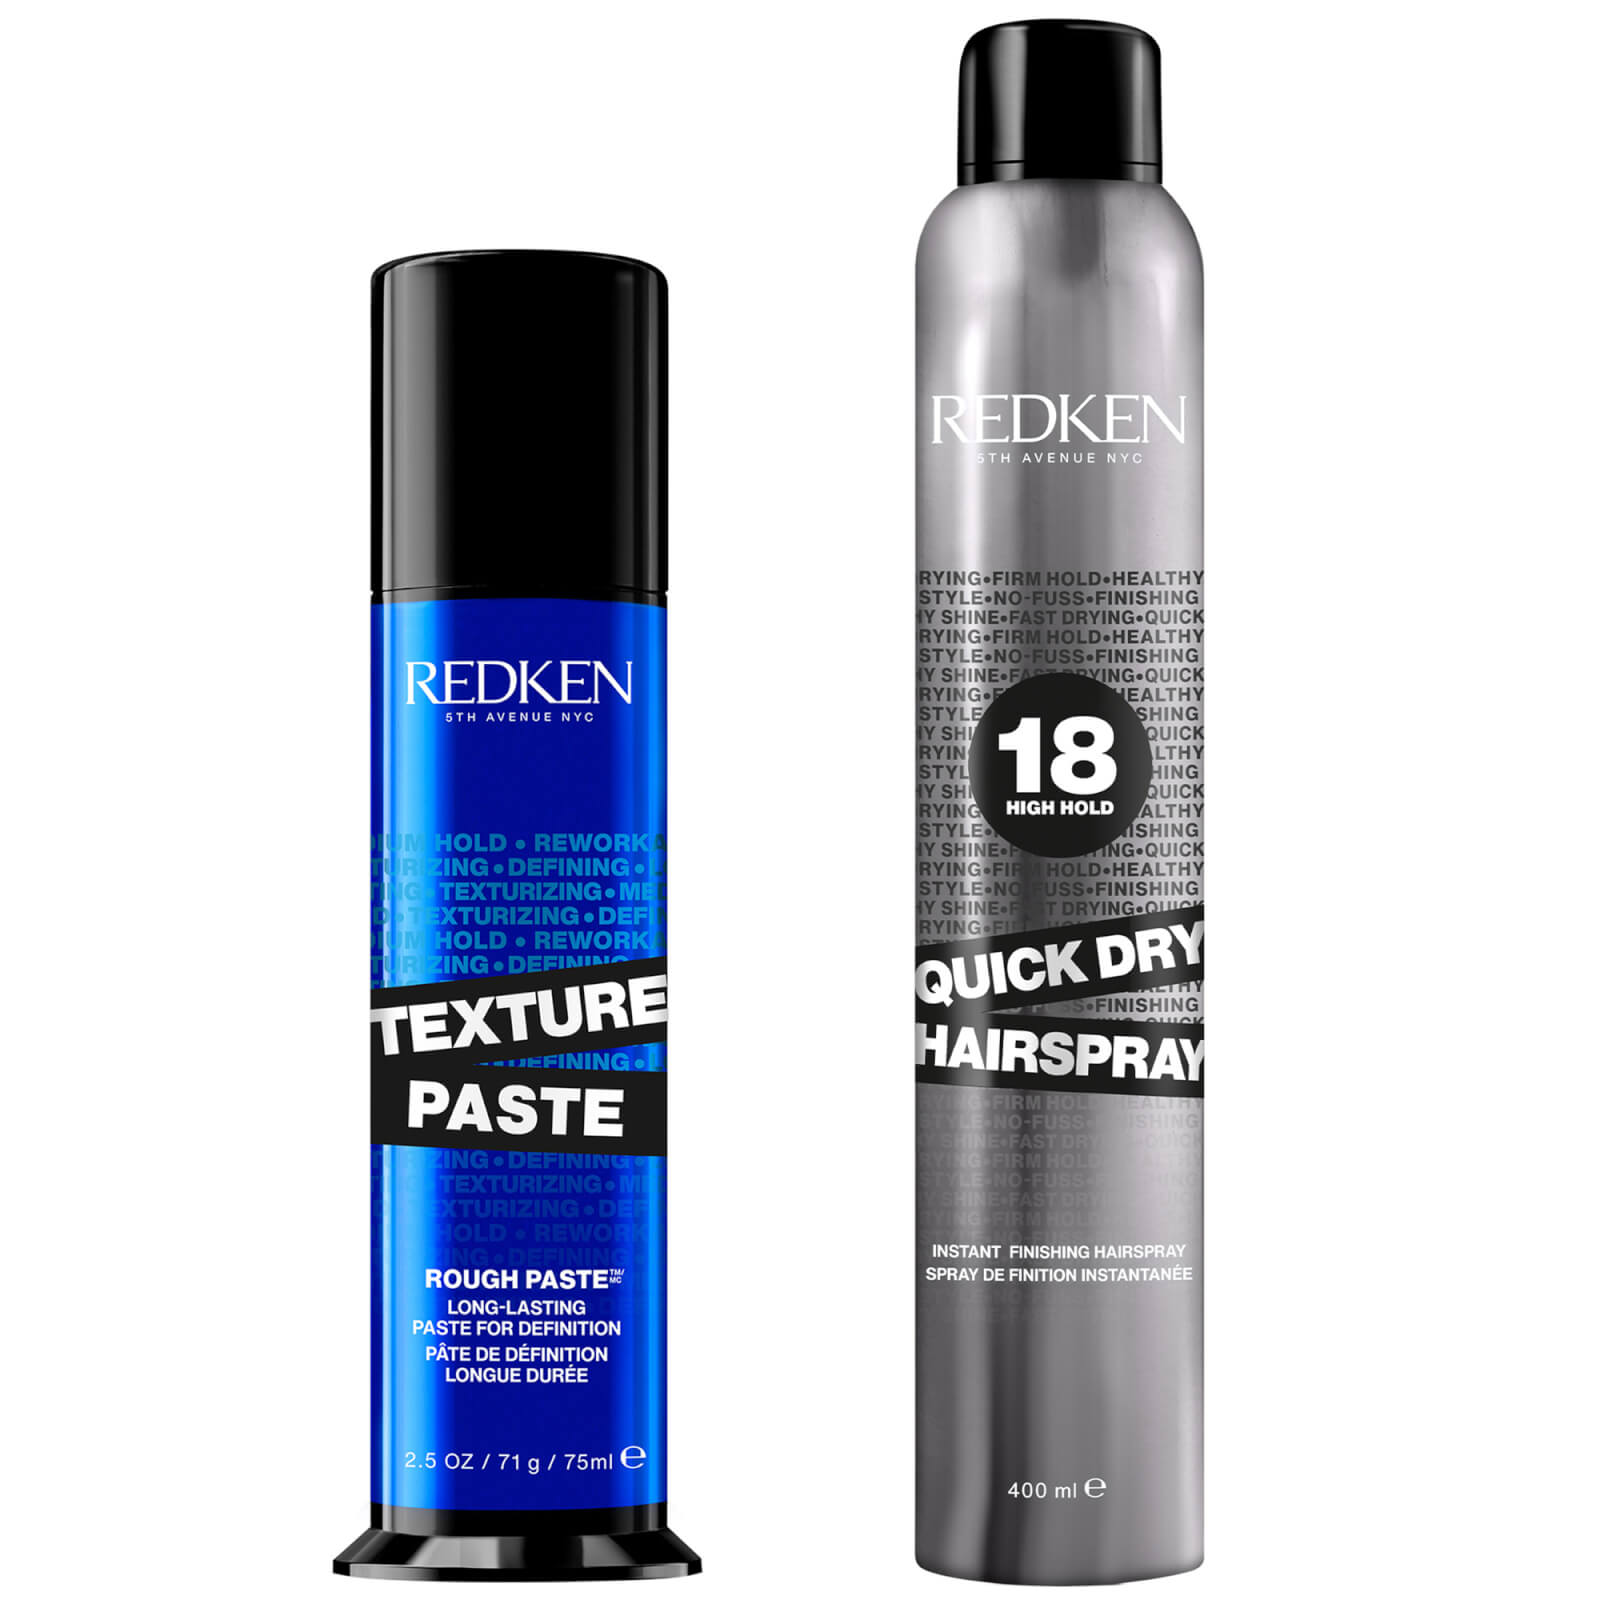 Redken Styling Texture Paste and Quick Dry Hair Spray Bundle